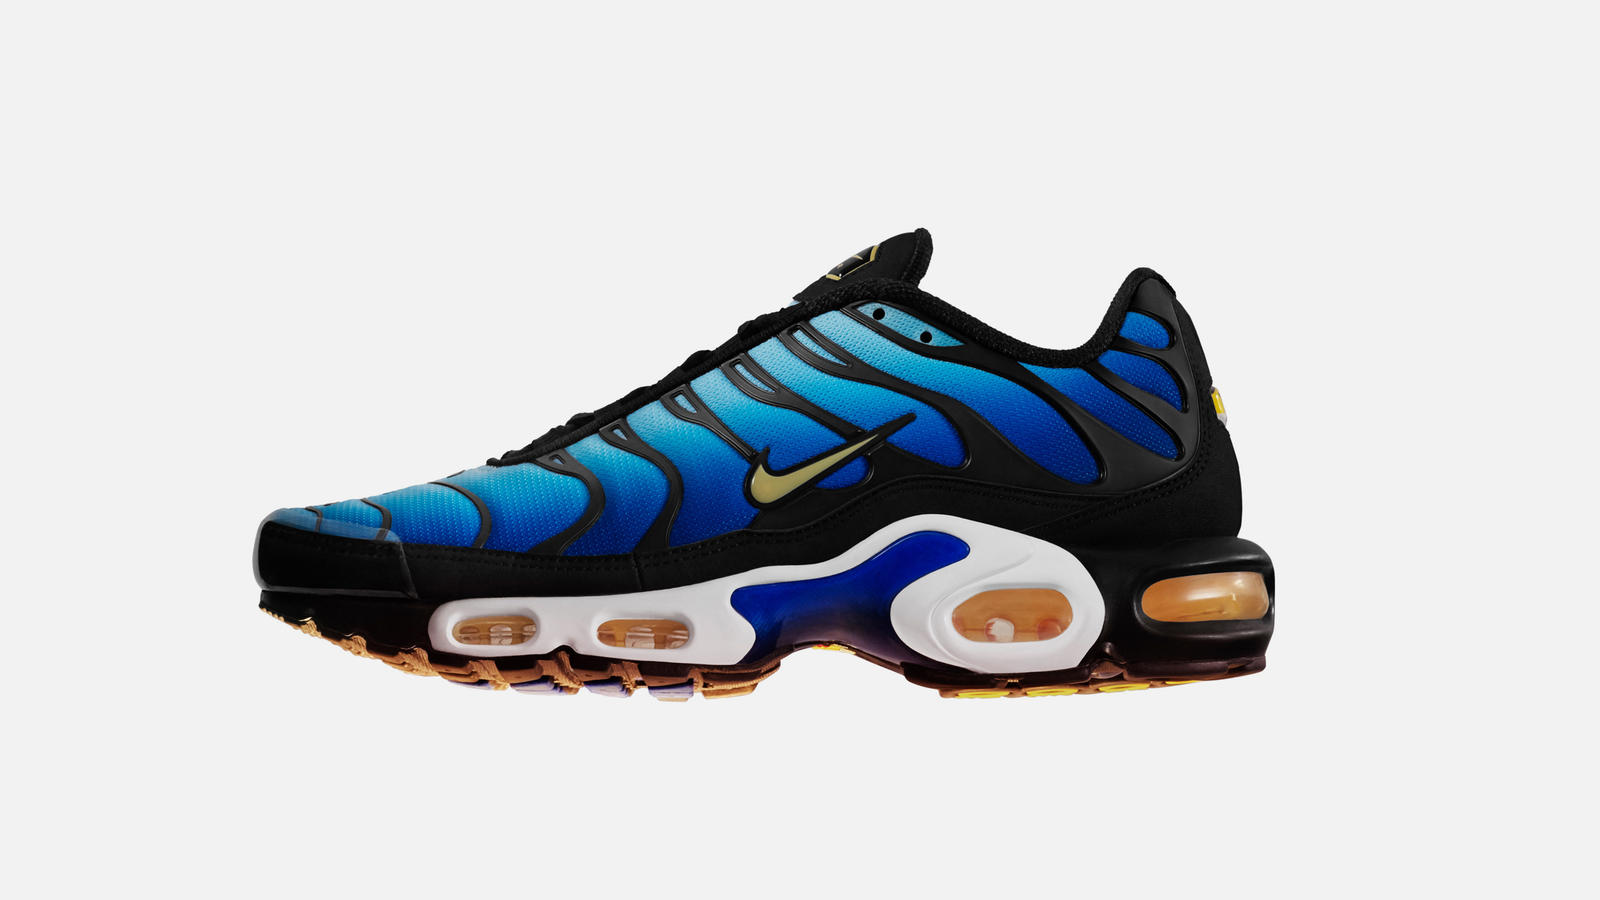 Nike to Relaunch the Air Max Plus in 